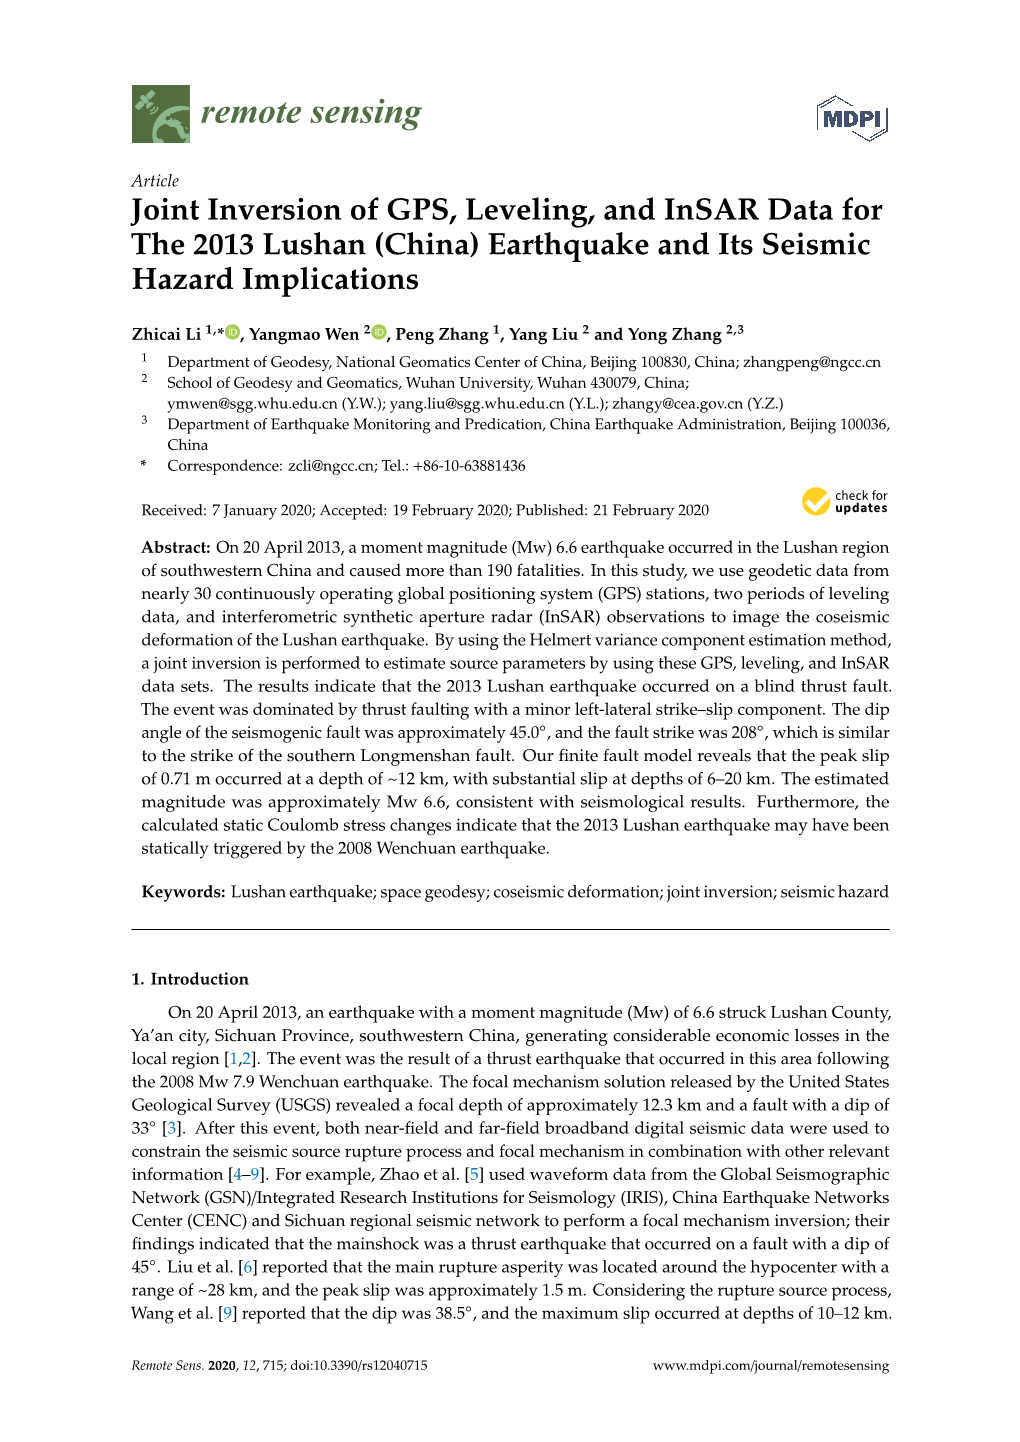 Joint Inversion of GPS, Leveling, and Insar Data for the 2013 Lushan (China) Earthquake and Its Seismic Hazard Implications